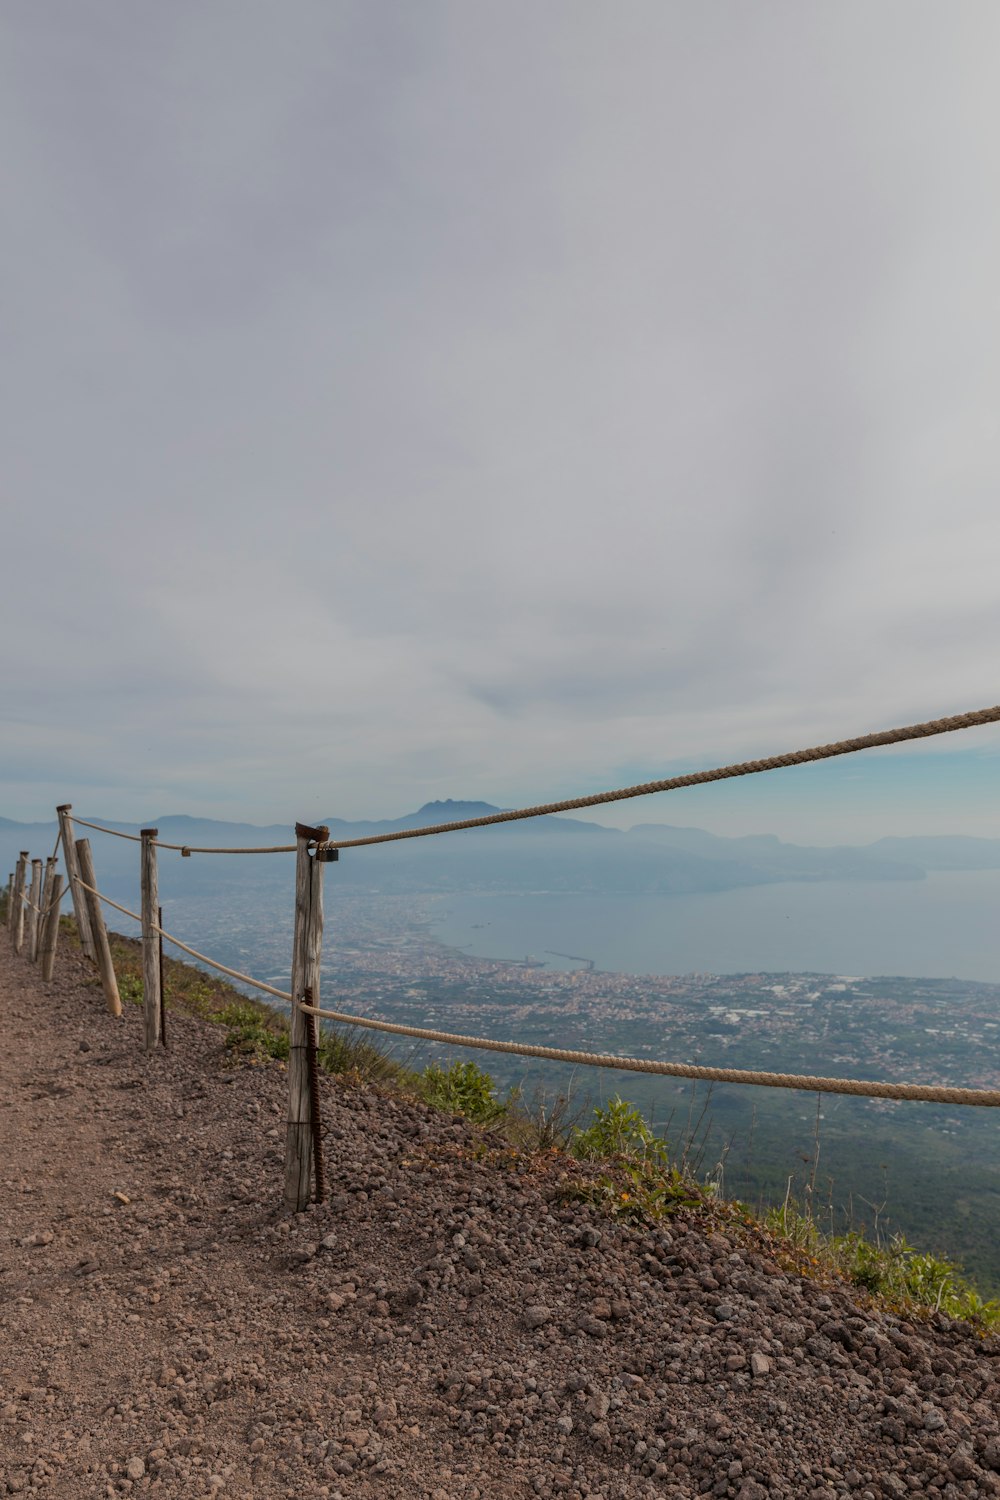 a fence on a hill overlooking a body of water